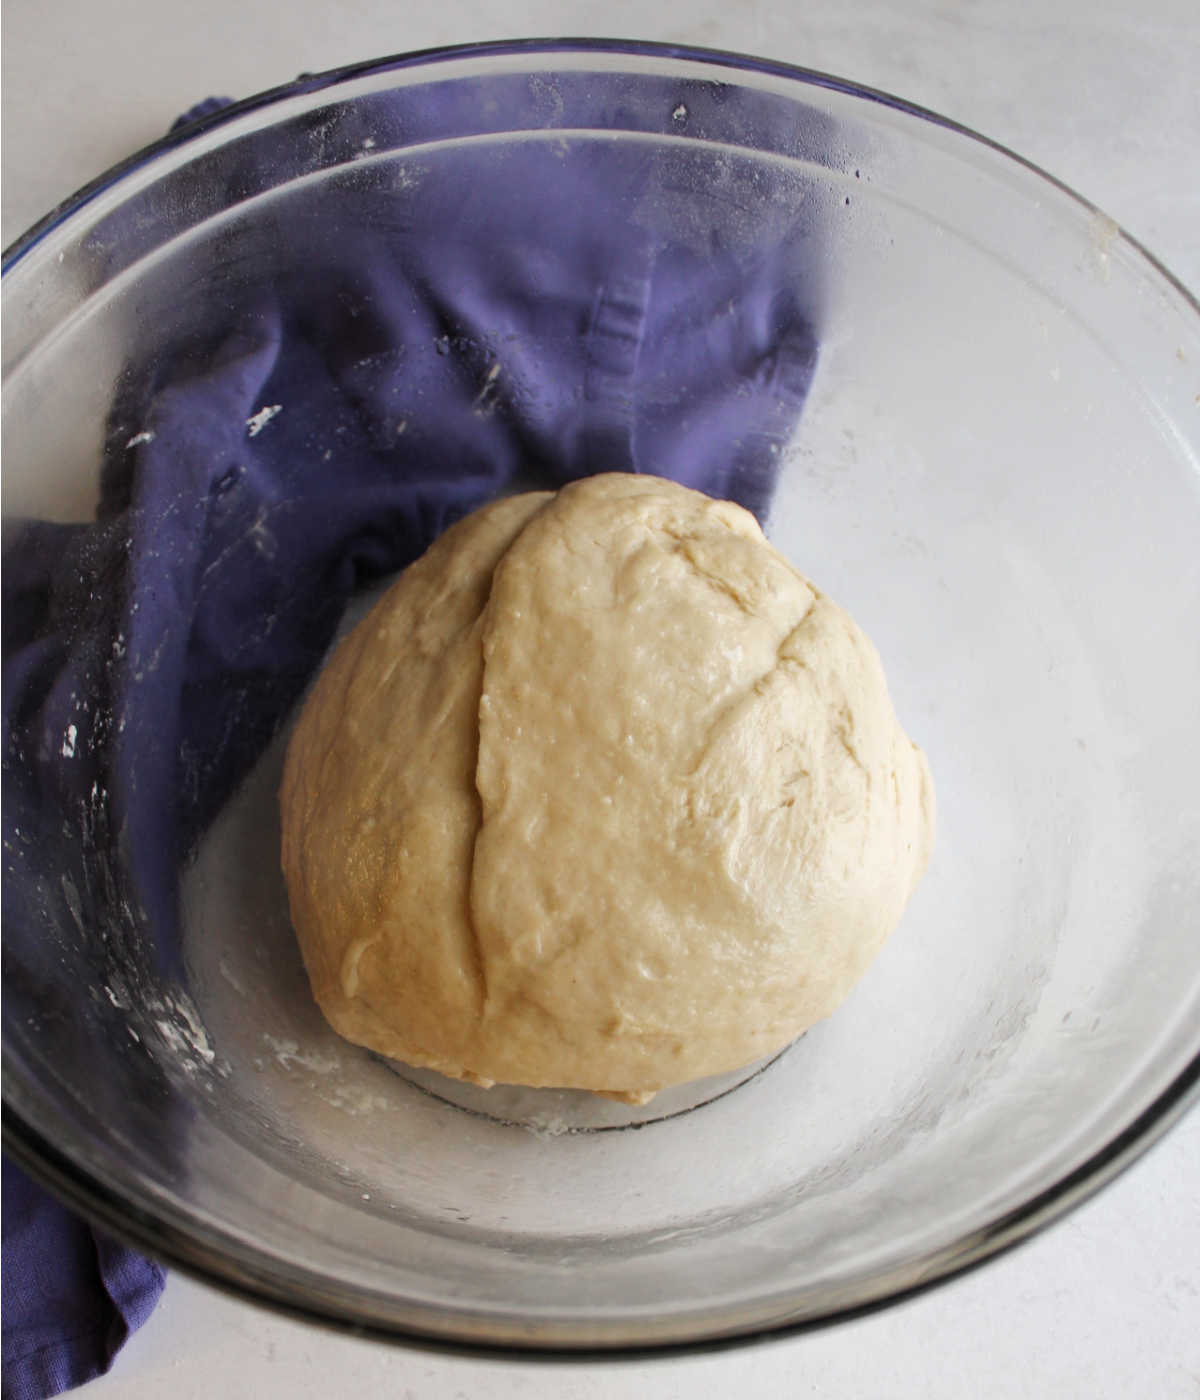 Greased bowl with ball of kneaded pizza dough, ready to proof.